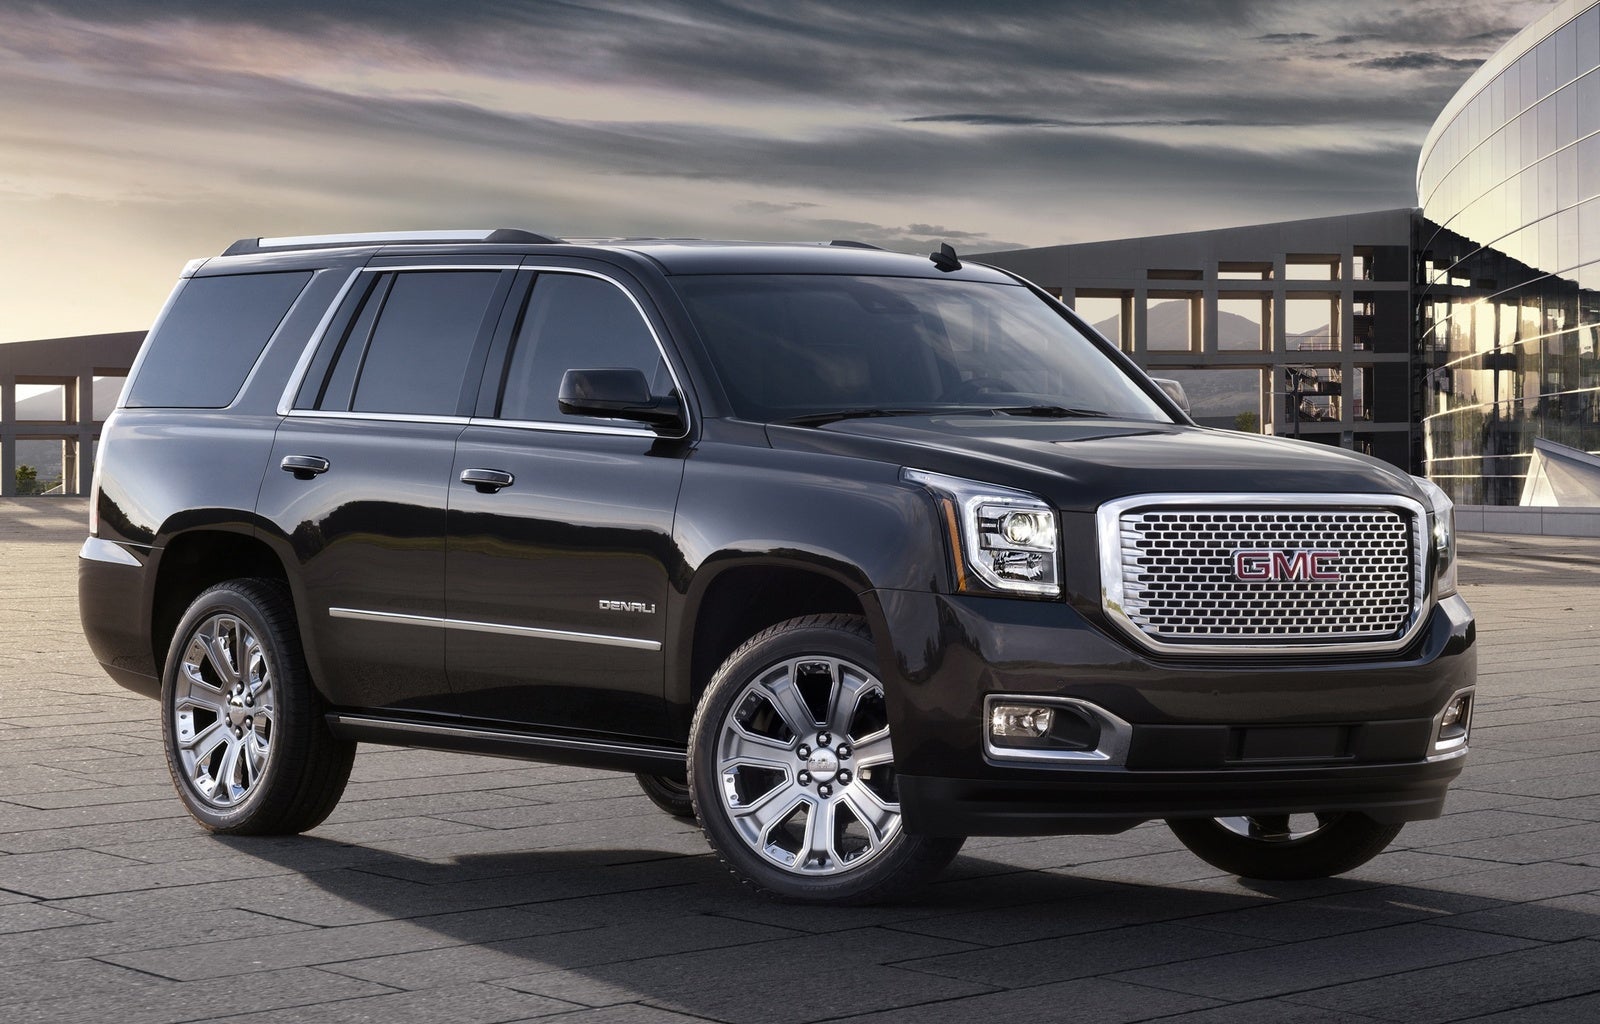 Compare gmc acadia and chevrolet tahoe #5